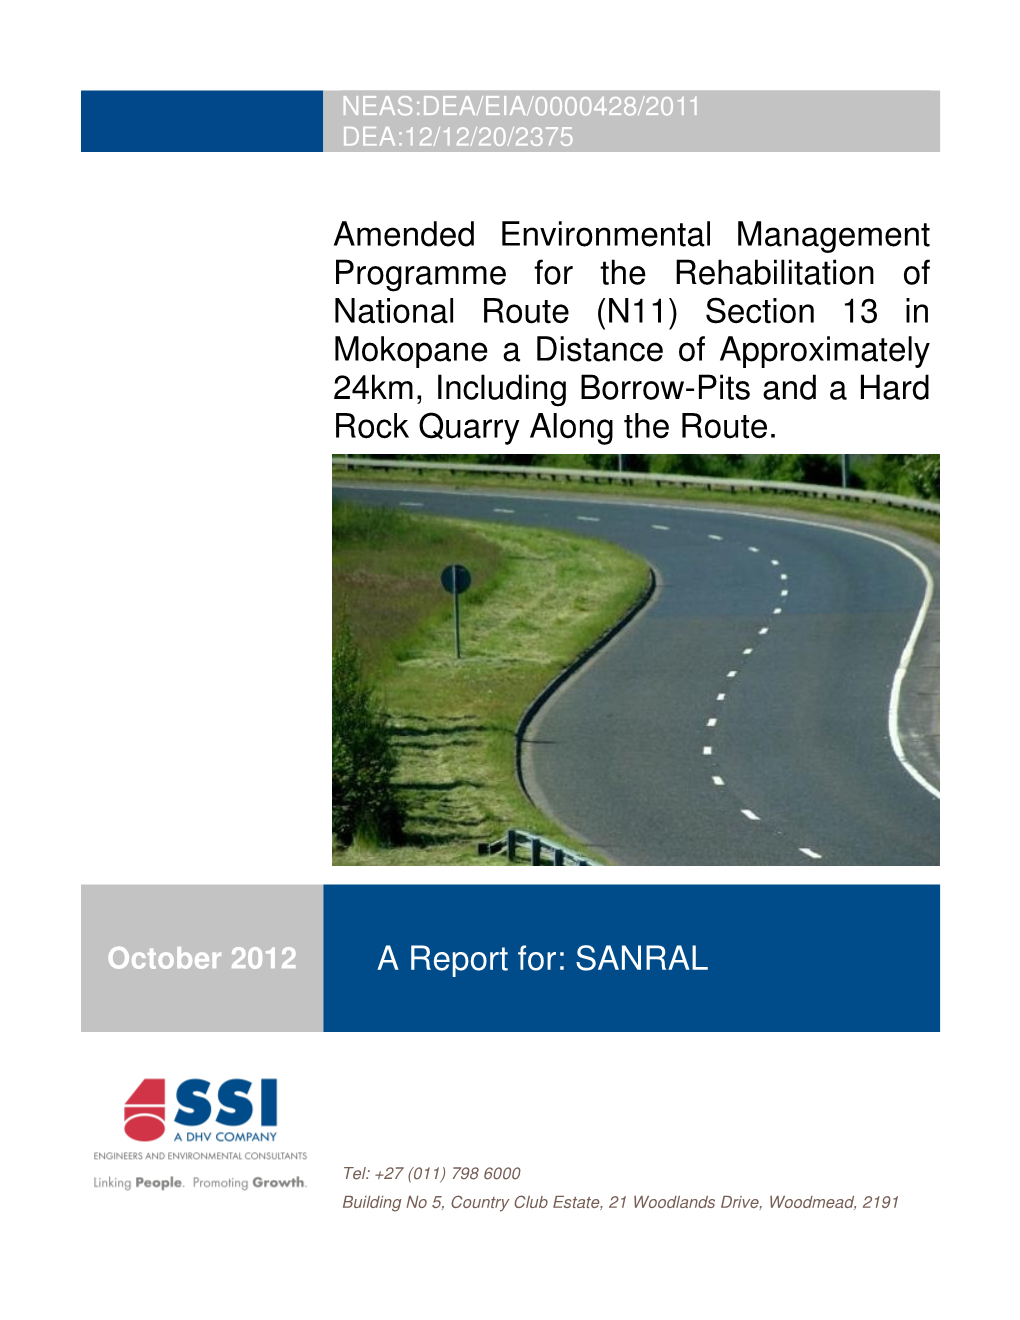 Amended Environmental Management Programme for The